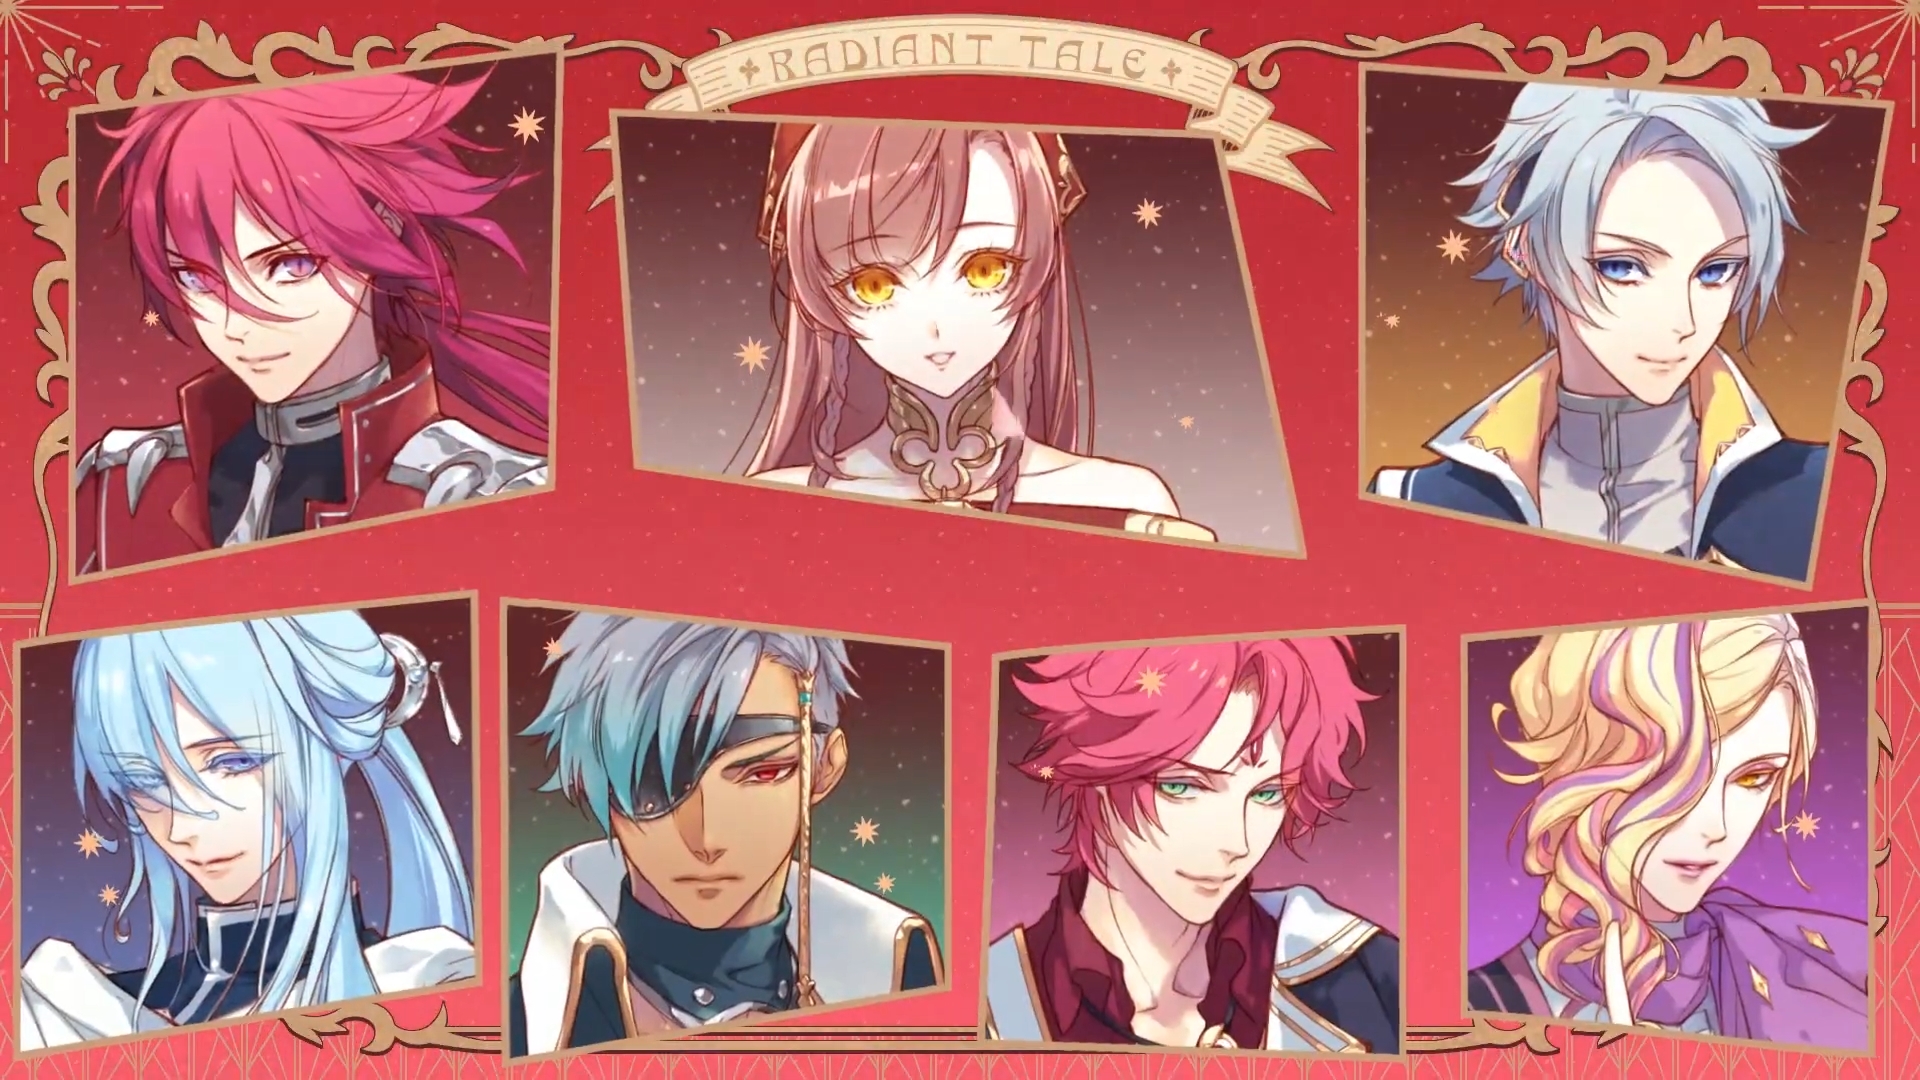 Otome Visual Novel ‘Radiant Tale’ Reveals Opening Movie Ahead of Late July Launch